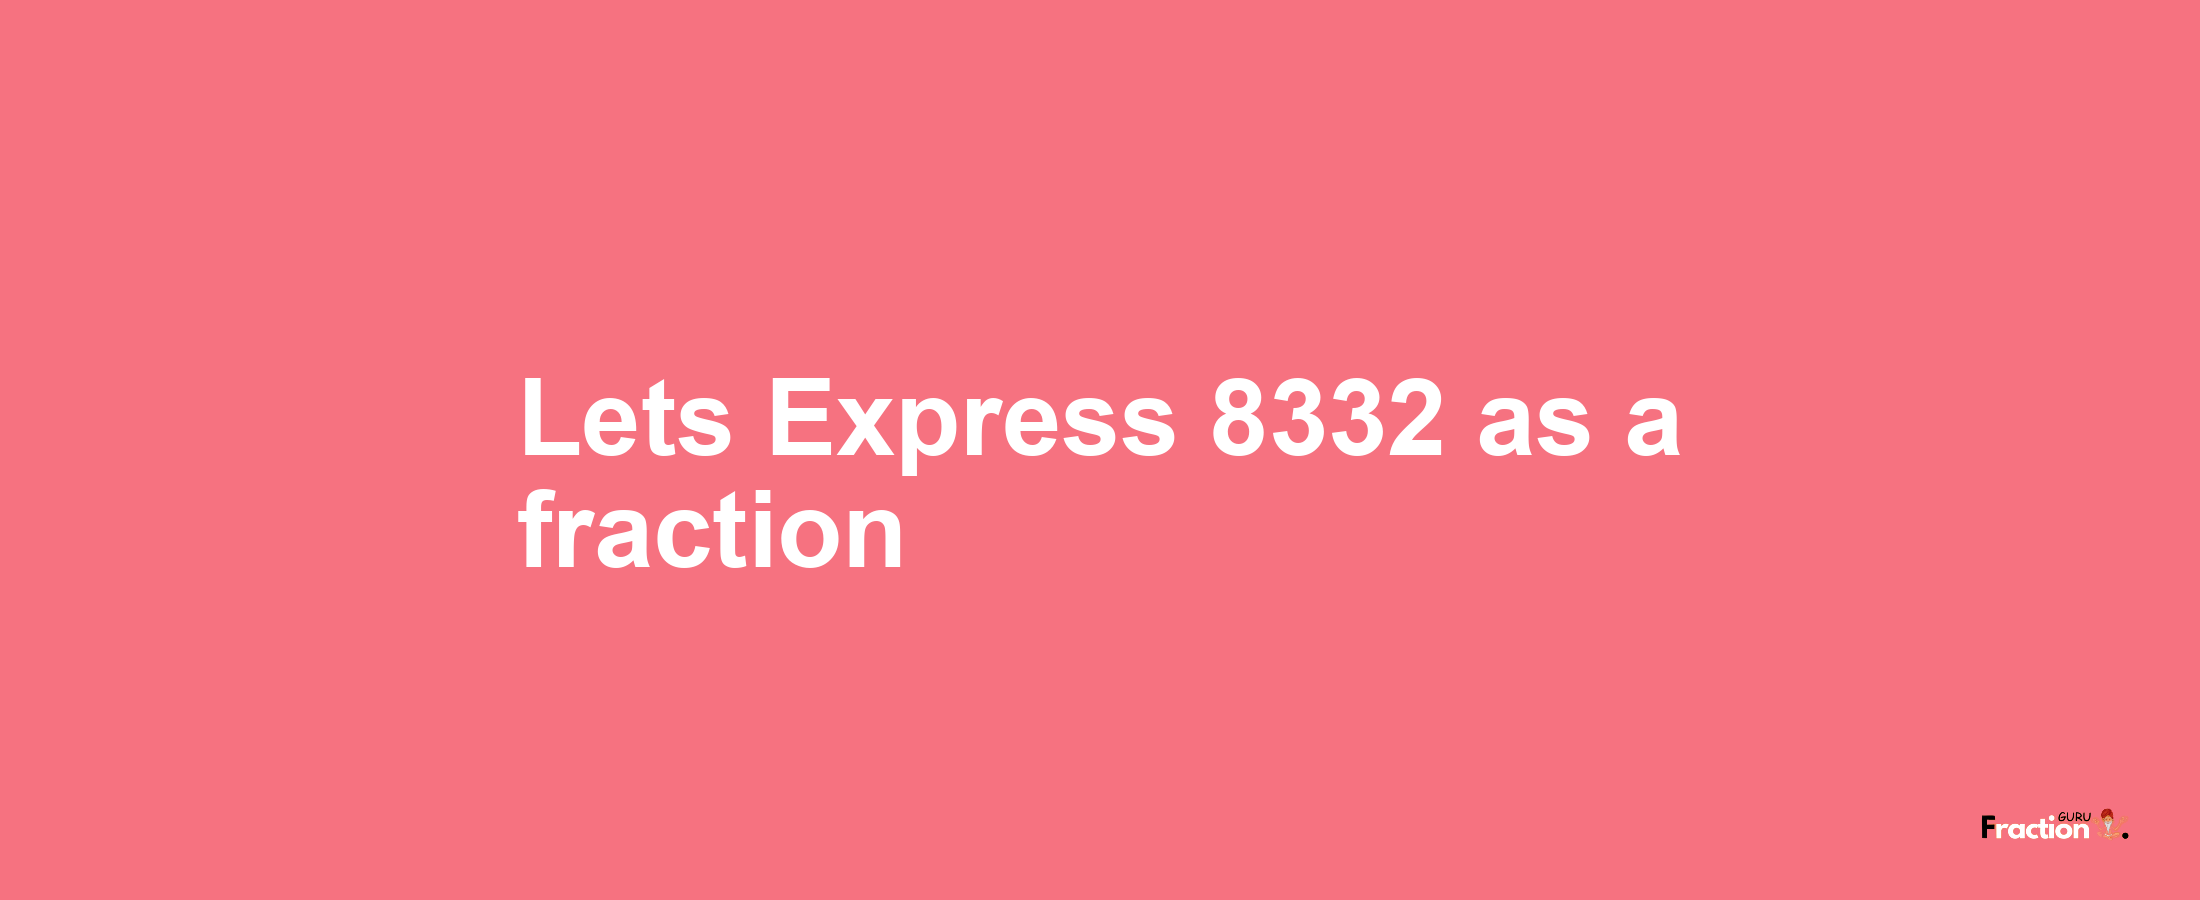 Lets Express 8332 as afraction